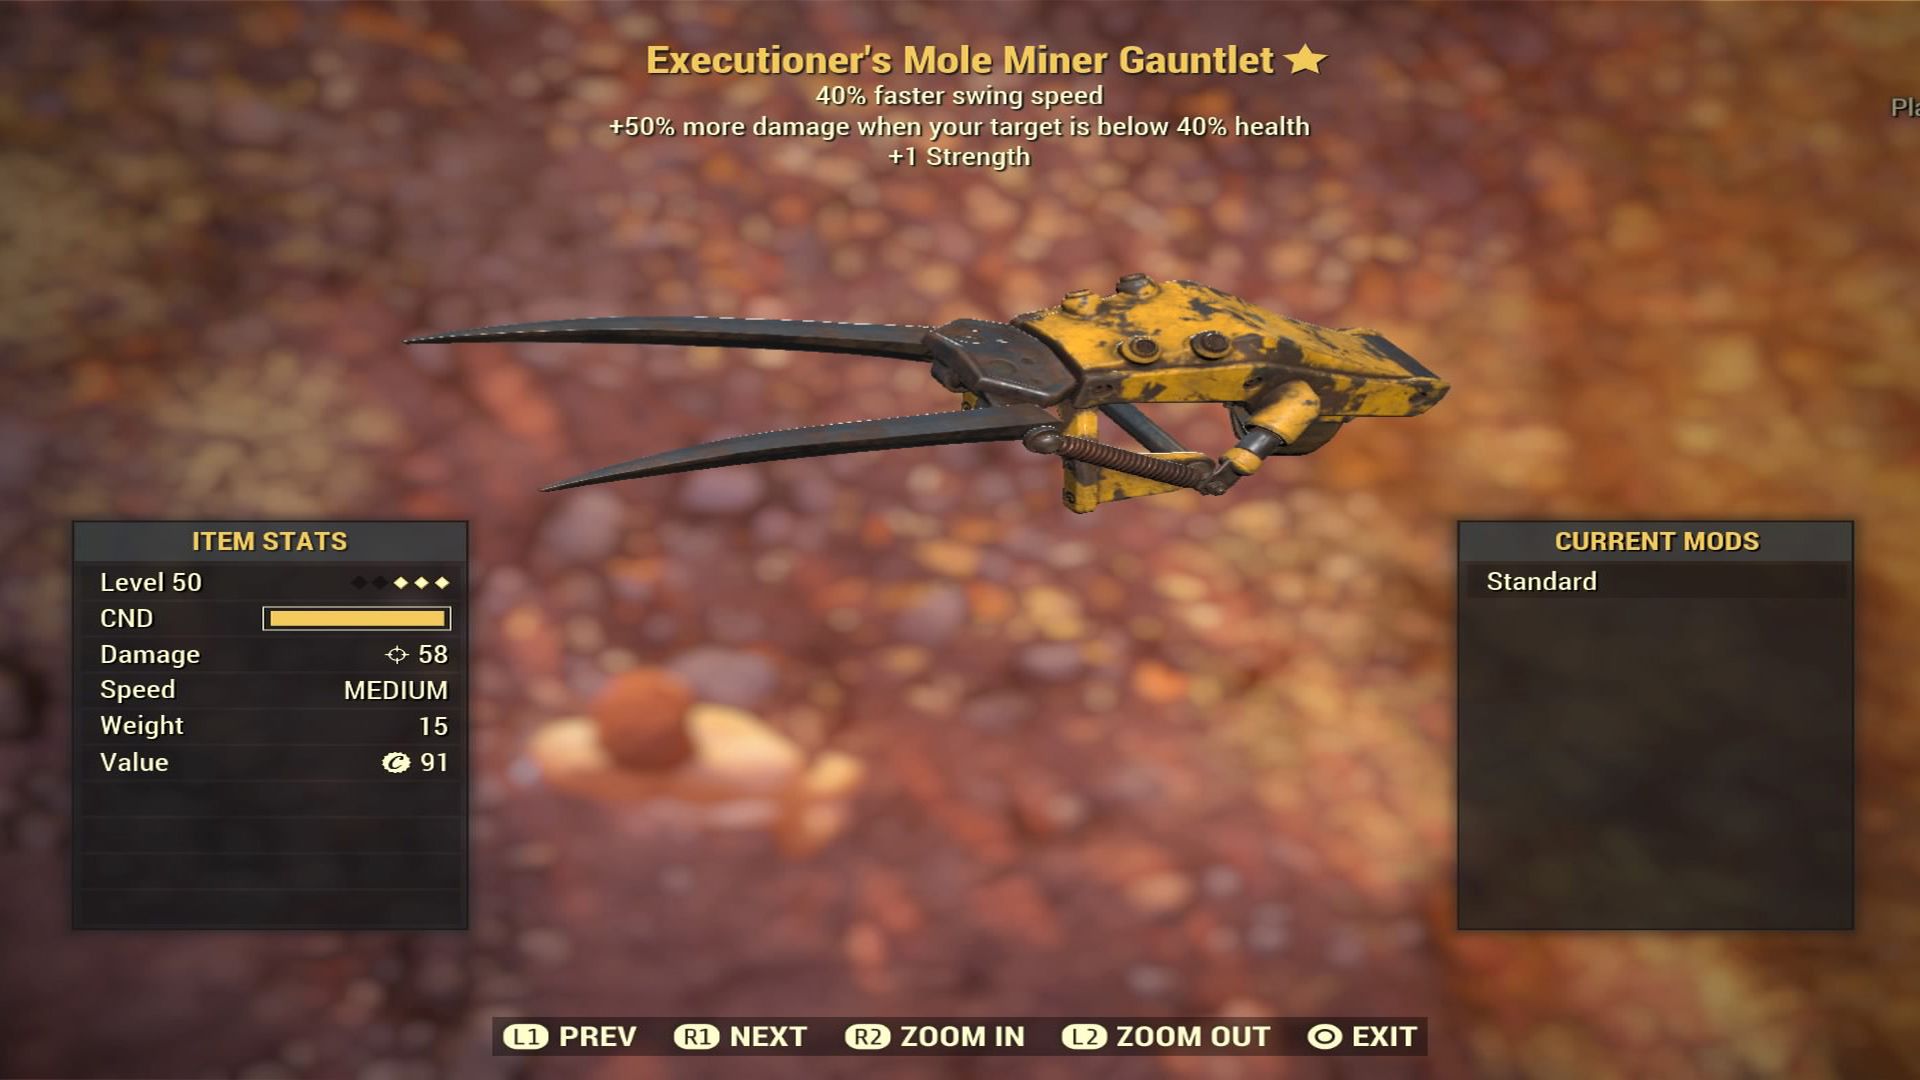 Fallout 76 Executioner‘s Mole Miner Gauntlet - Level 50